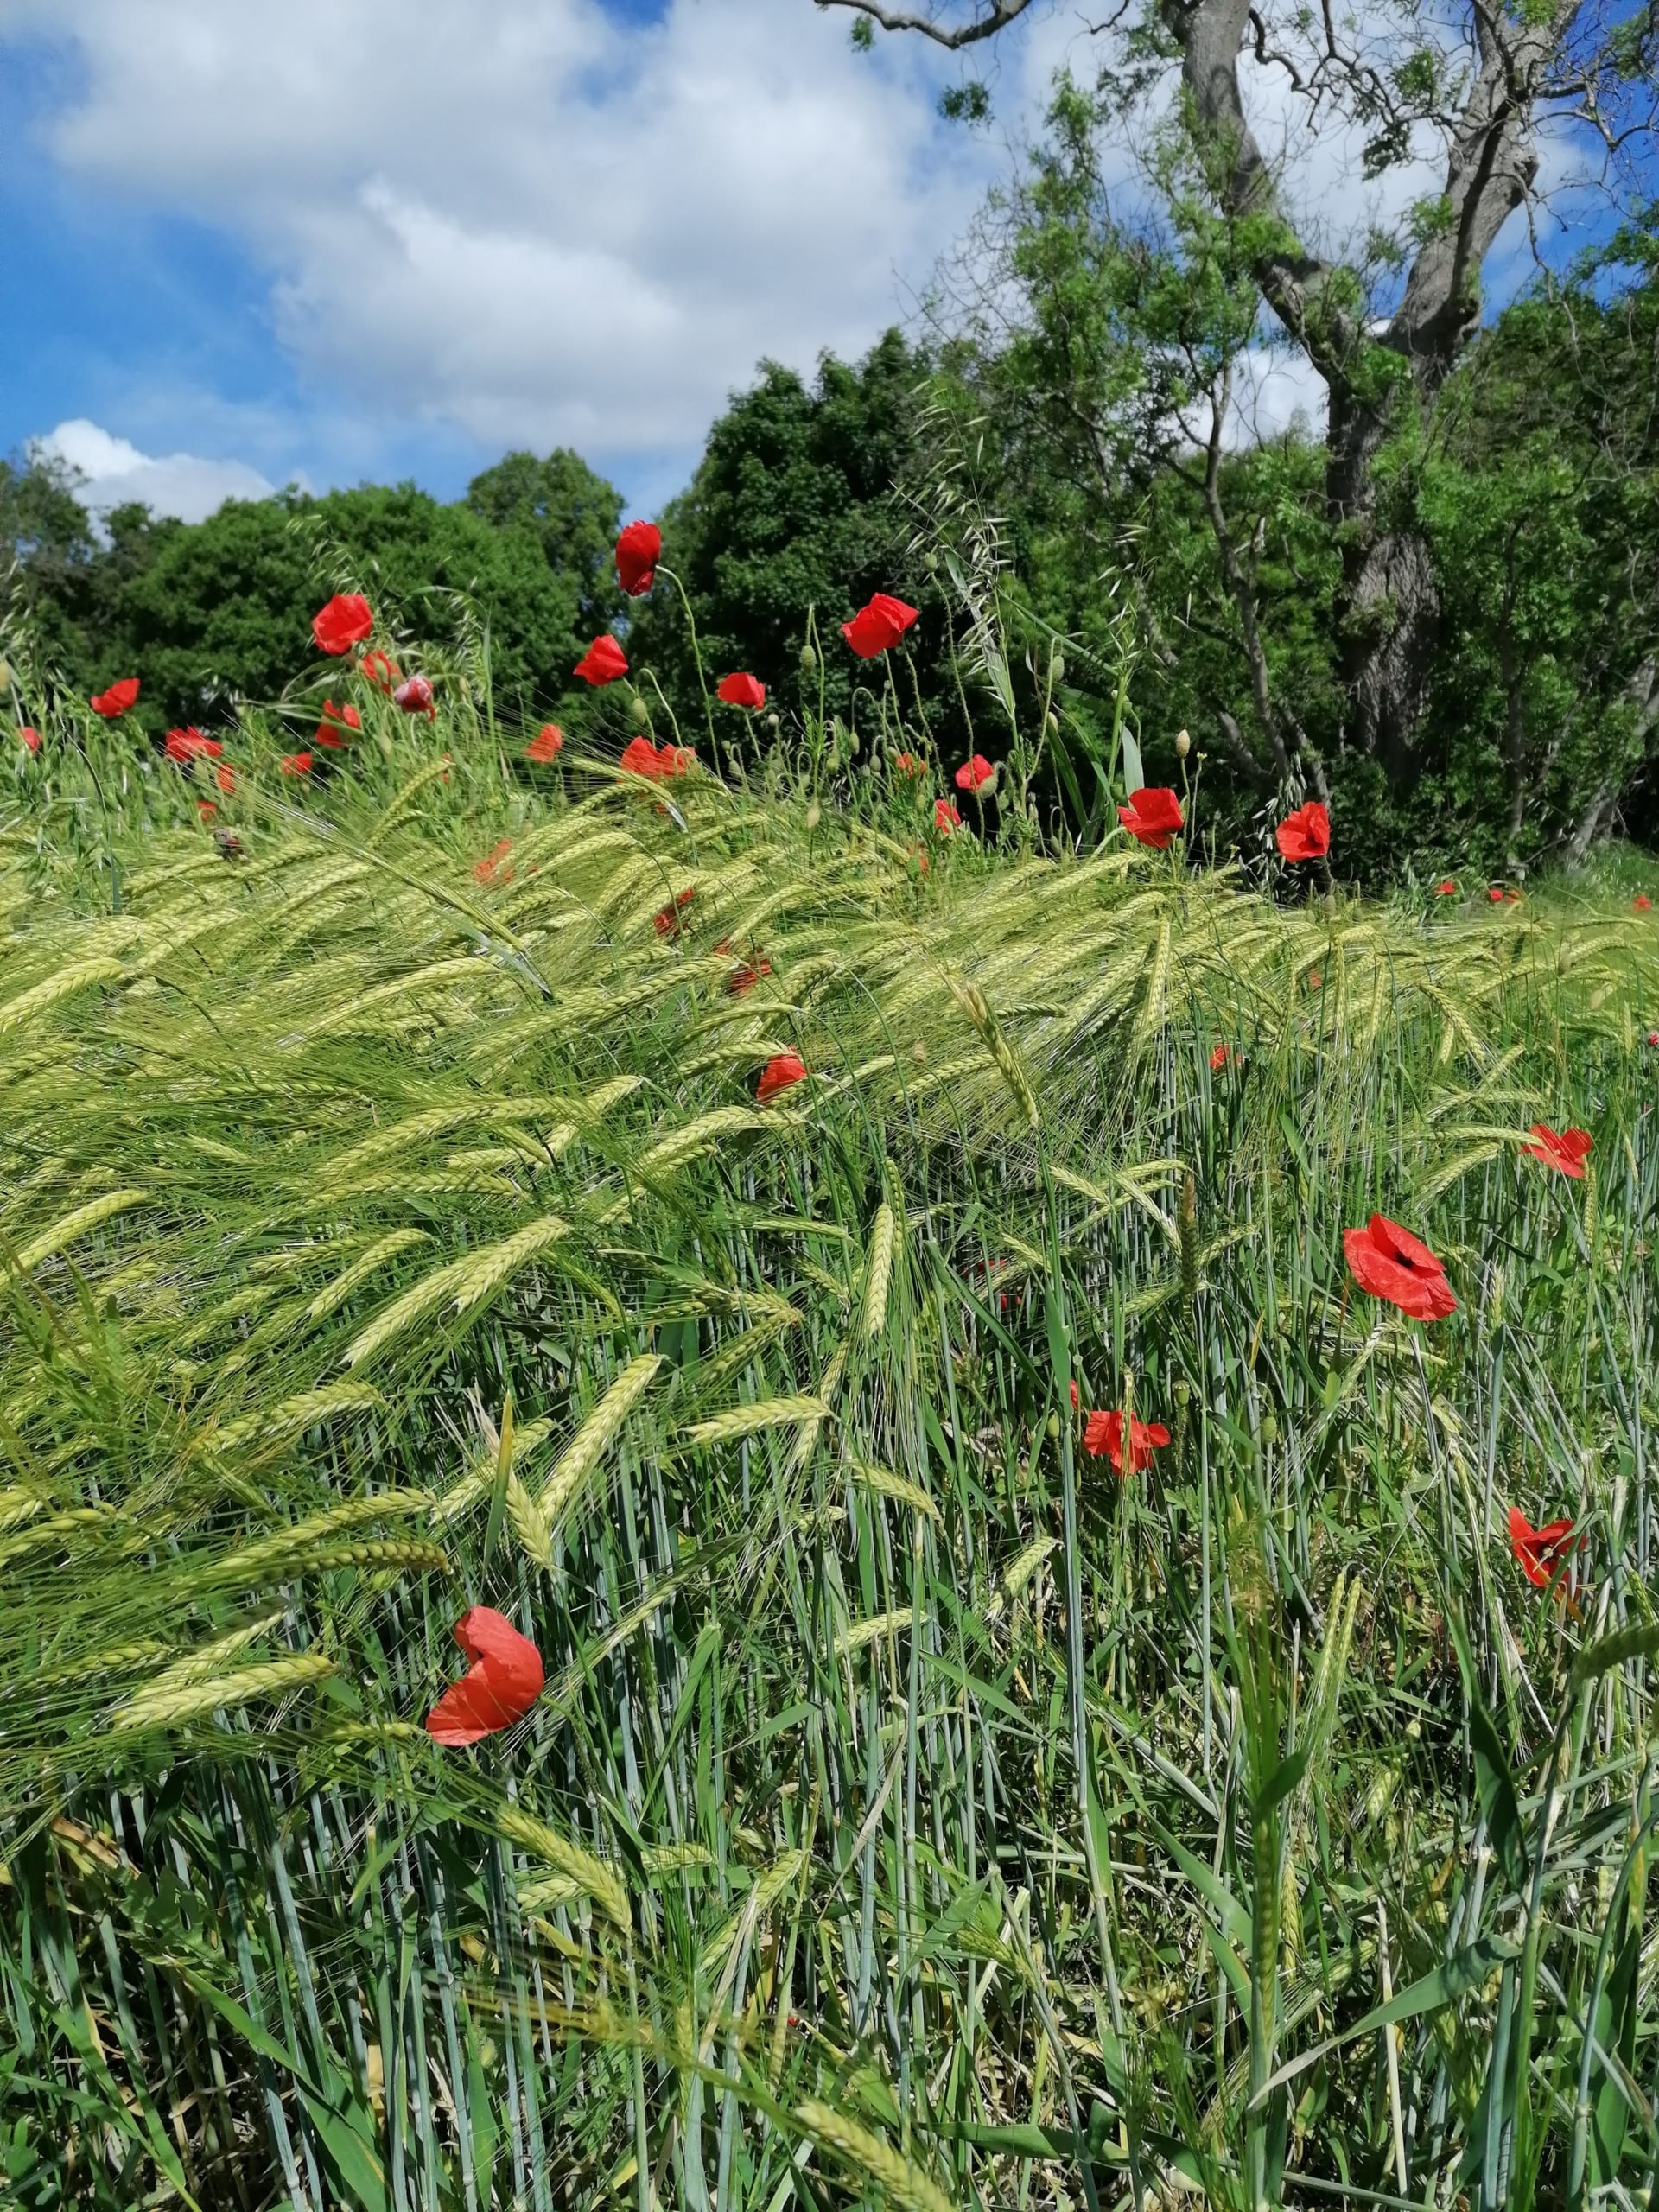 An image of green barley with poppies in flower